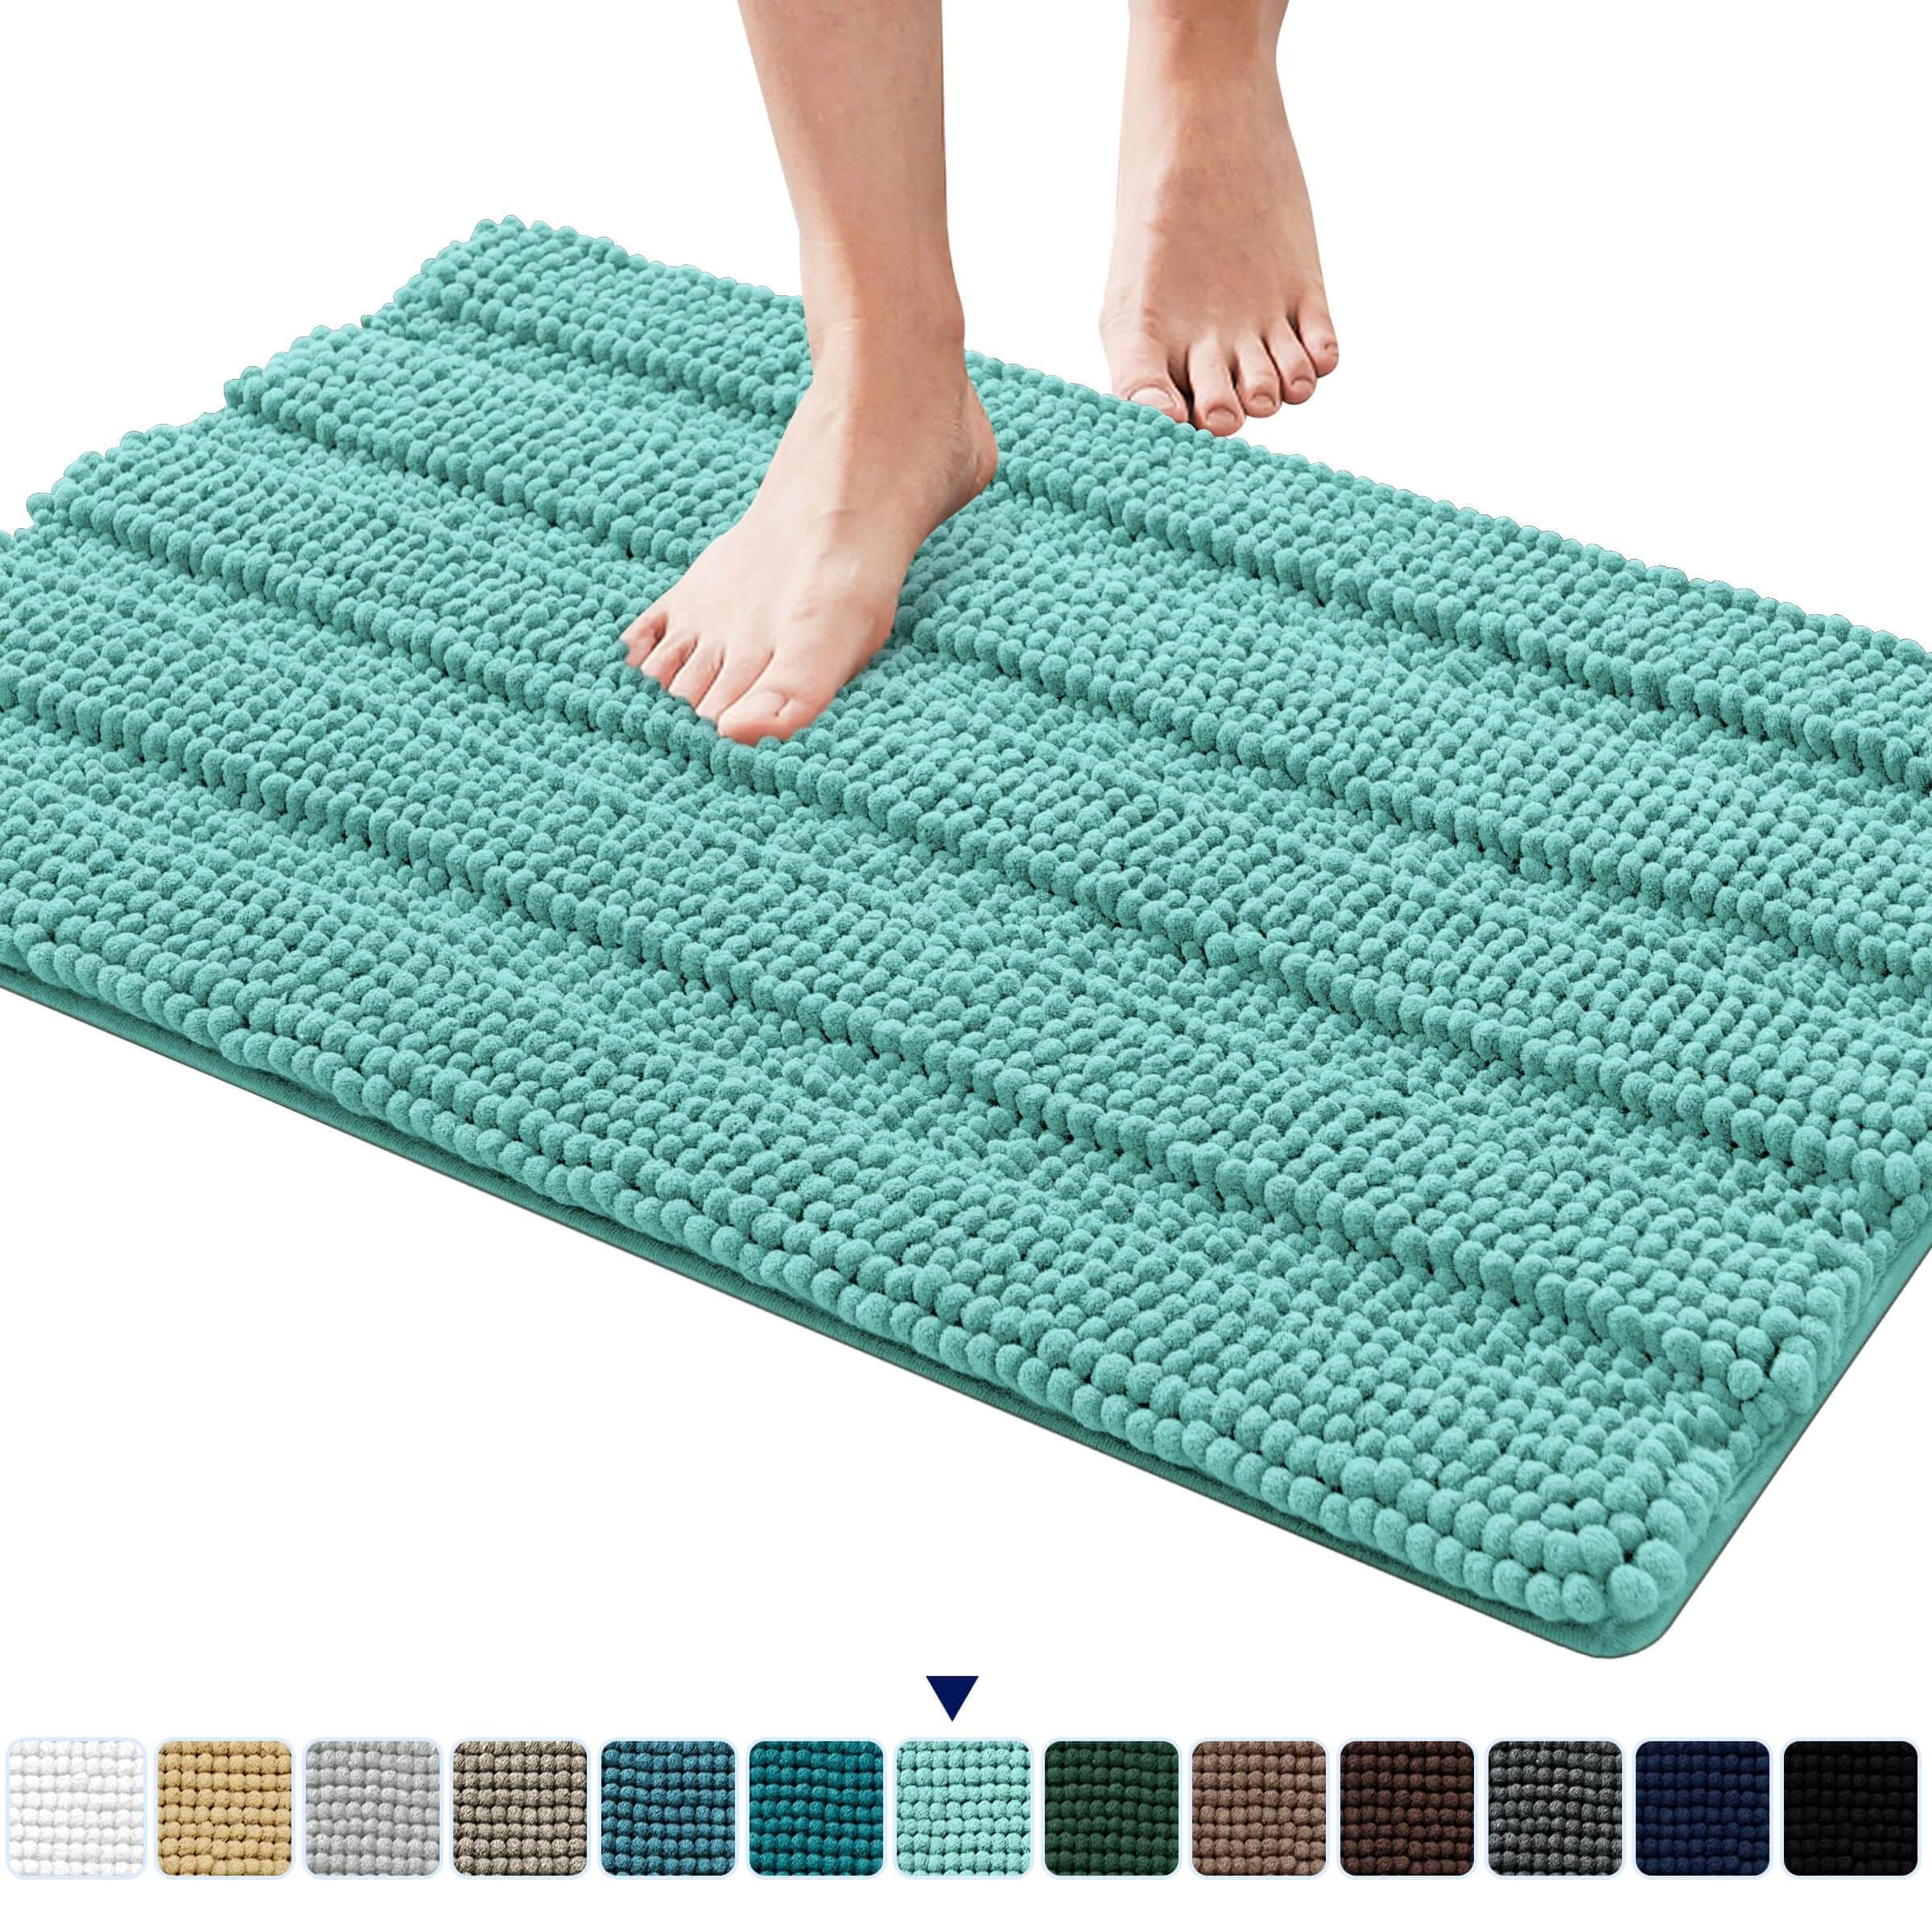 Subrtex Chenille Bathroom Rugs Soft Non-Slip Super Water Absorbing Shower Mats, 16 inchx24 inch, Taupe Brown, Size: 16 inch x 24 inch